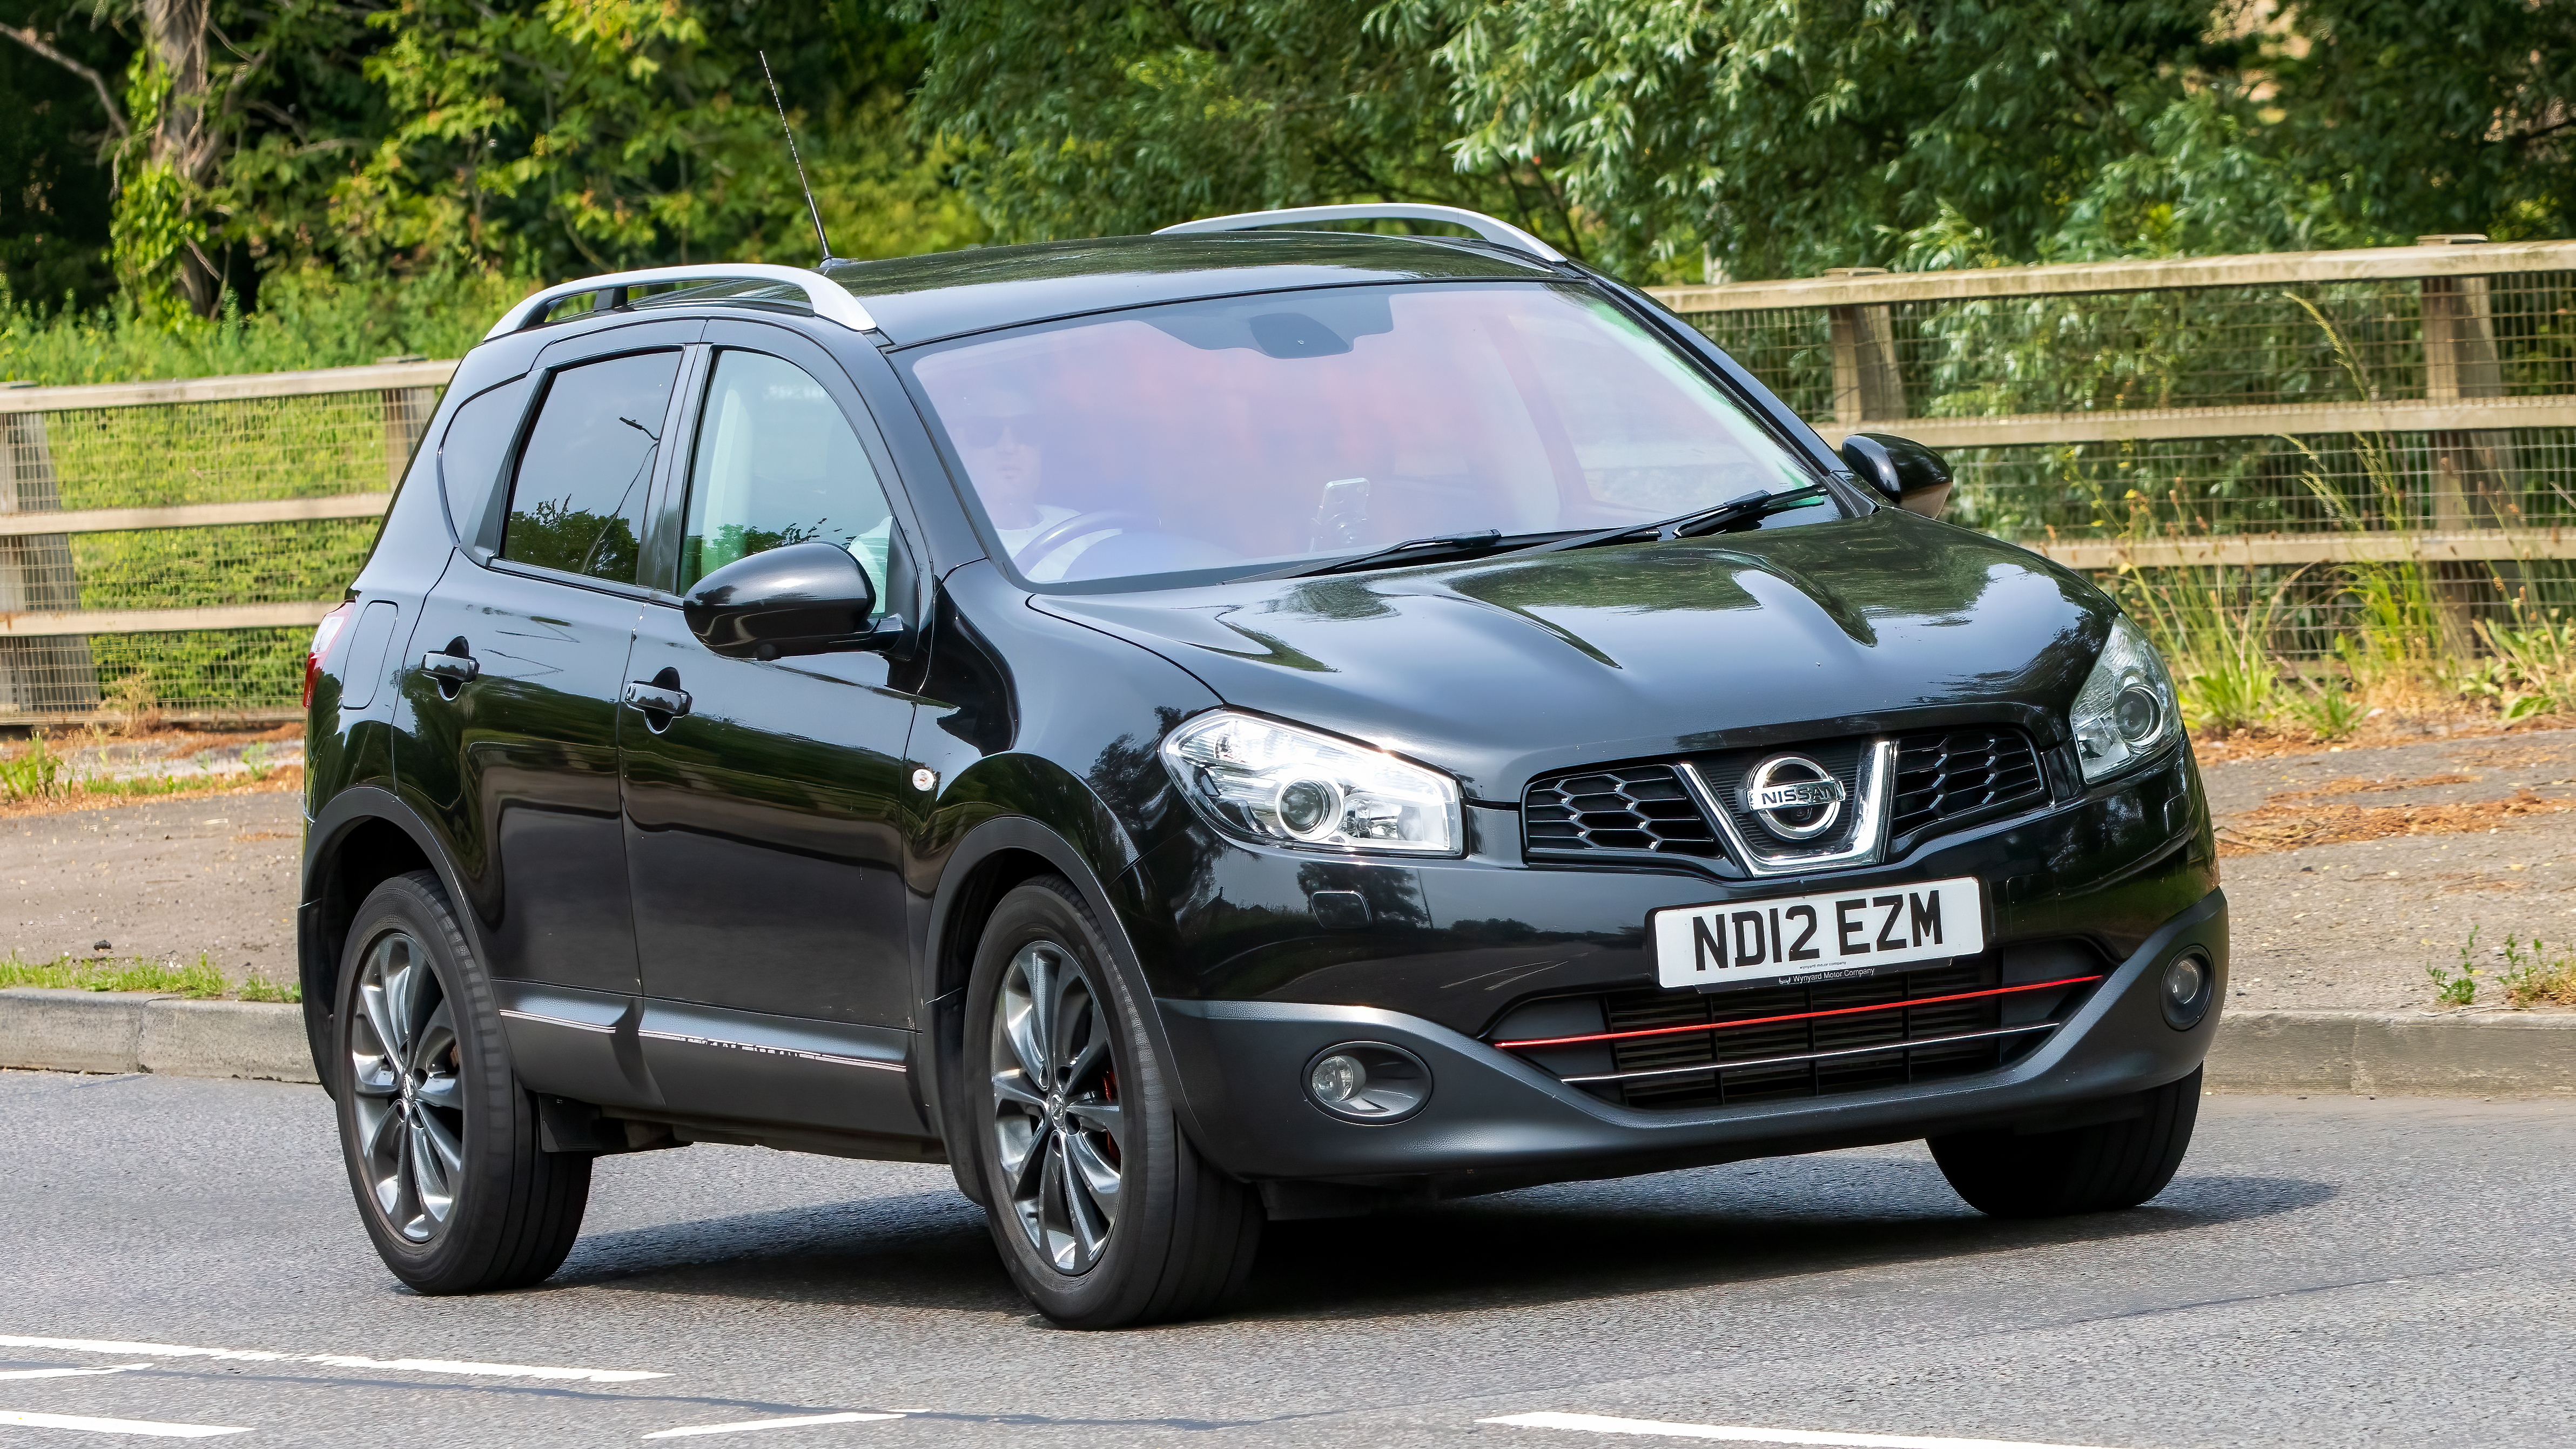 The Nissan Qashqai was was first on the list of the most sold motors in the UK in 2022